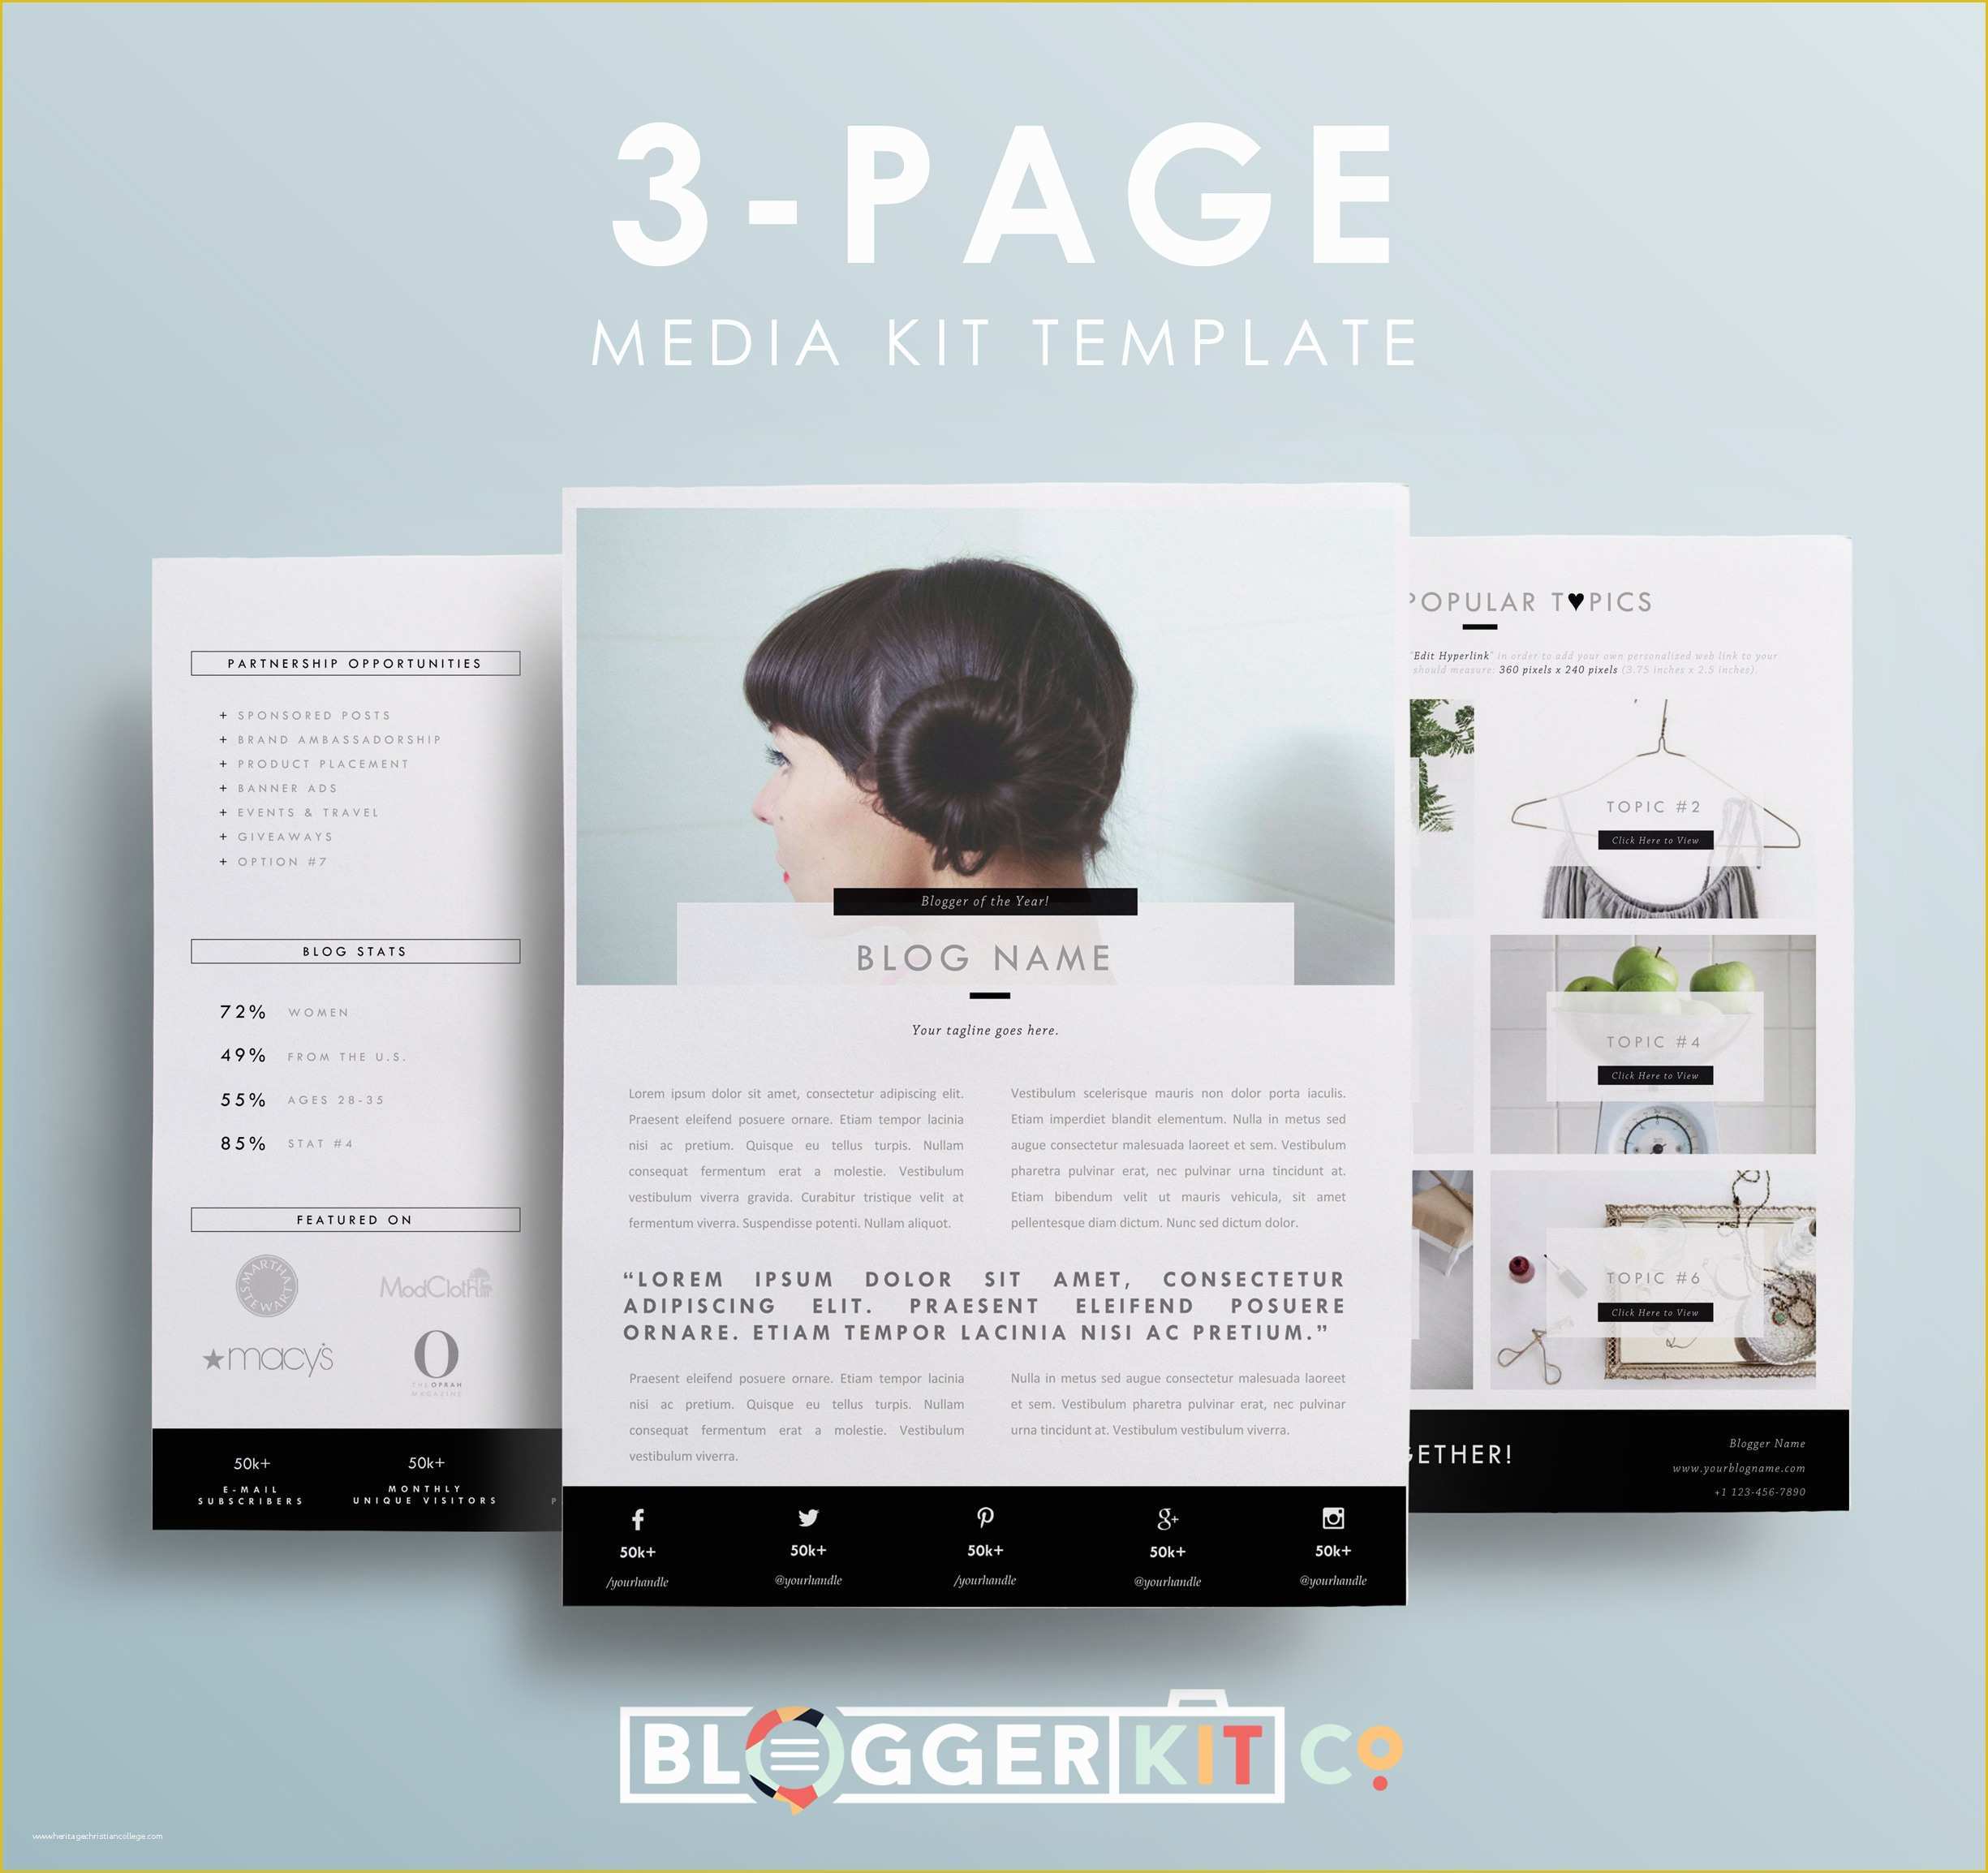 Free Press Kit Template Psd Of My Darling Clementine 3 Page Media Kit Template